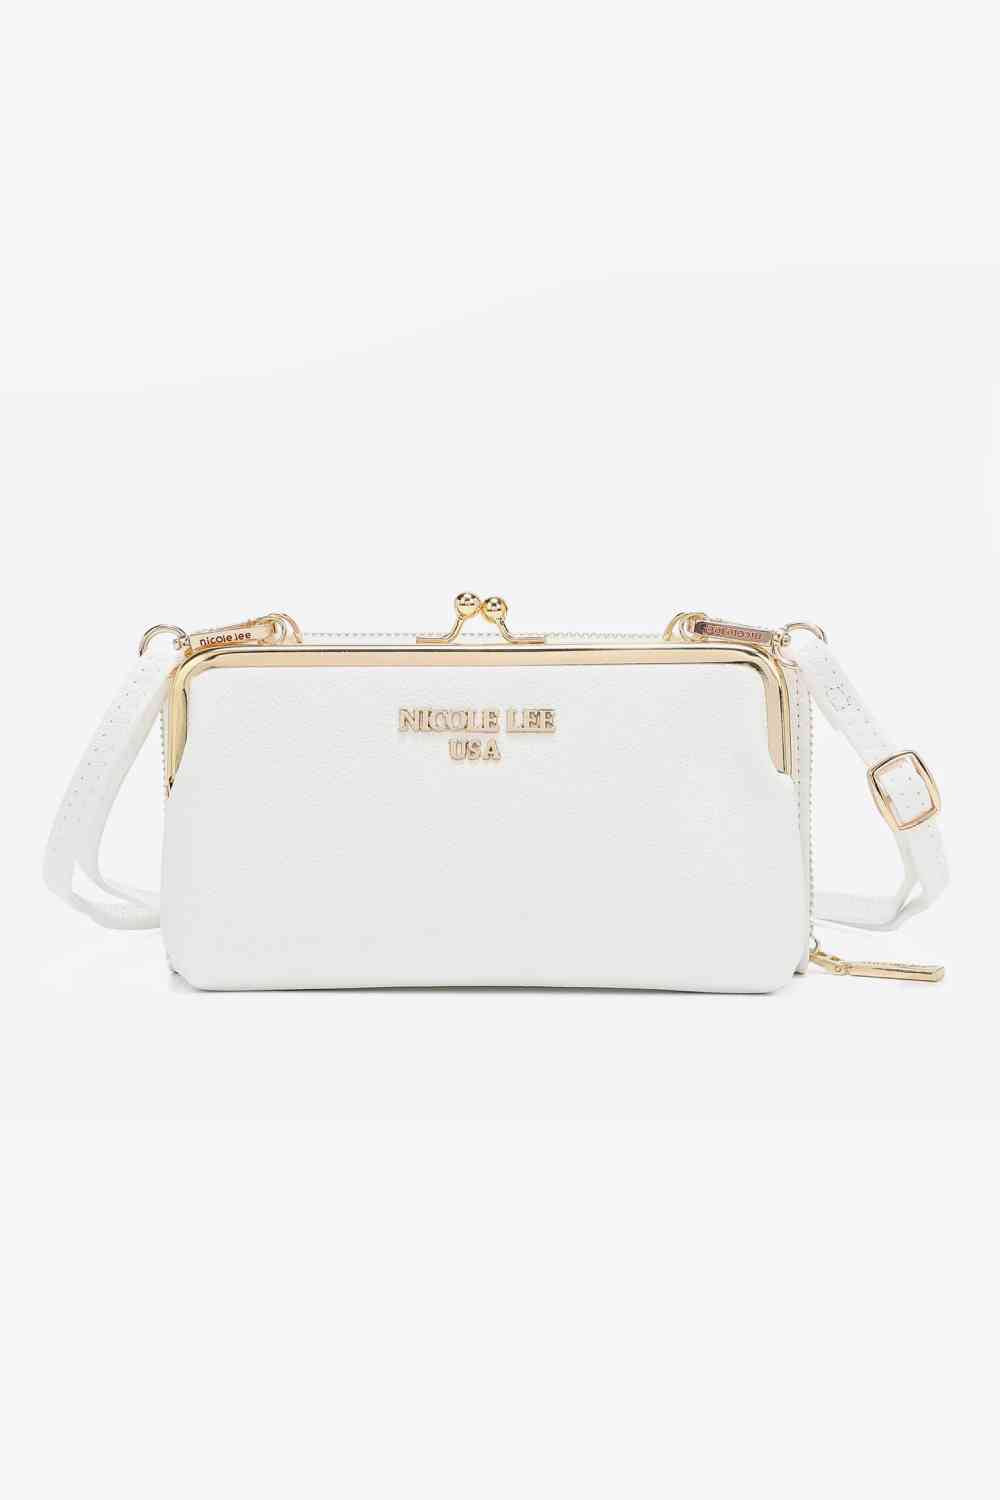 Nicole Lee USA Night Out Crossbody Wallet Purse White One Size